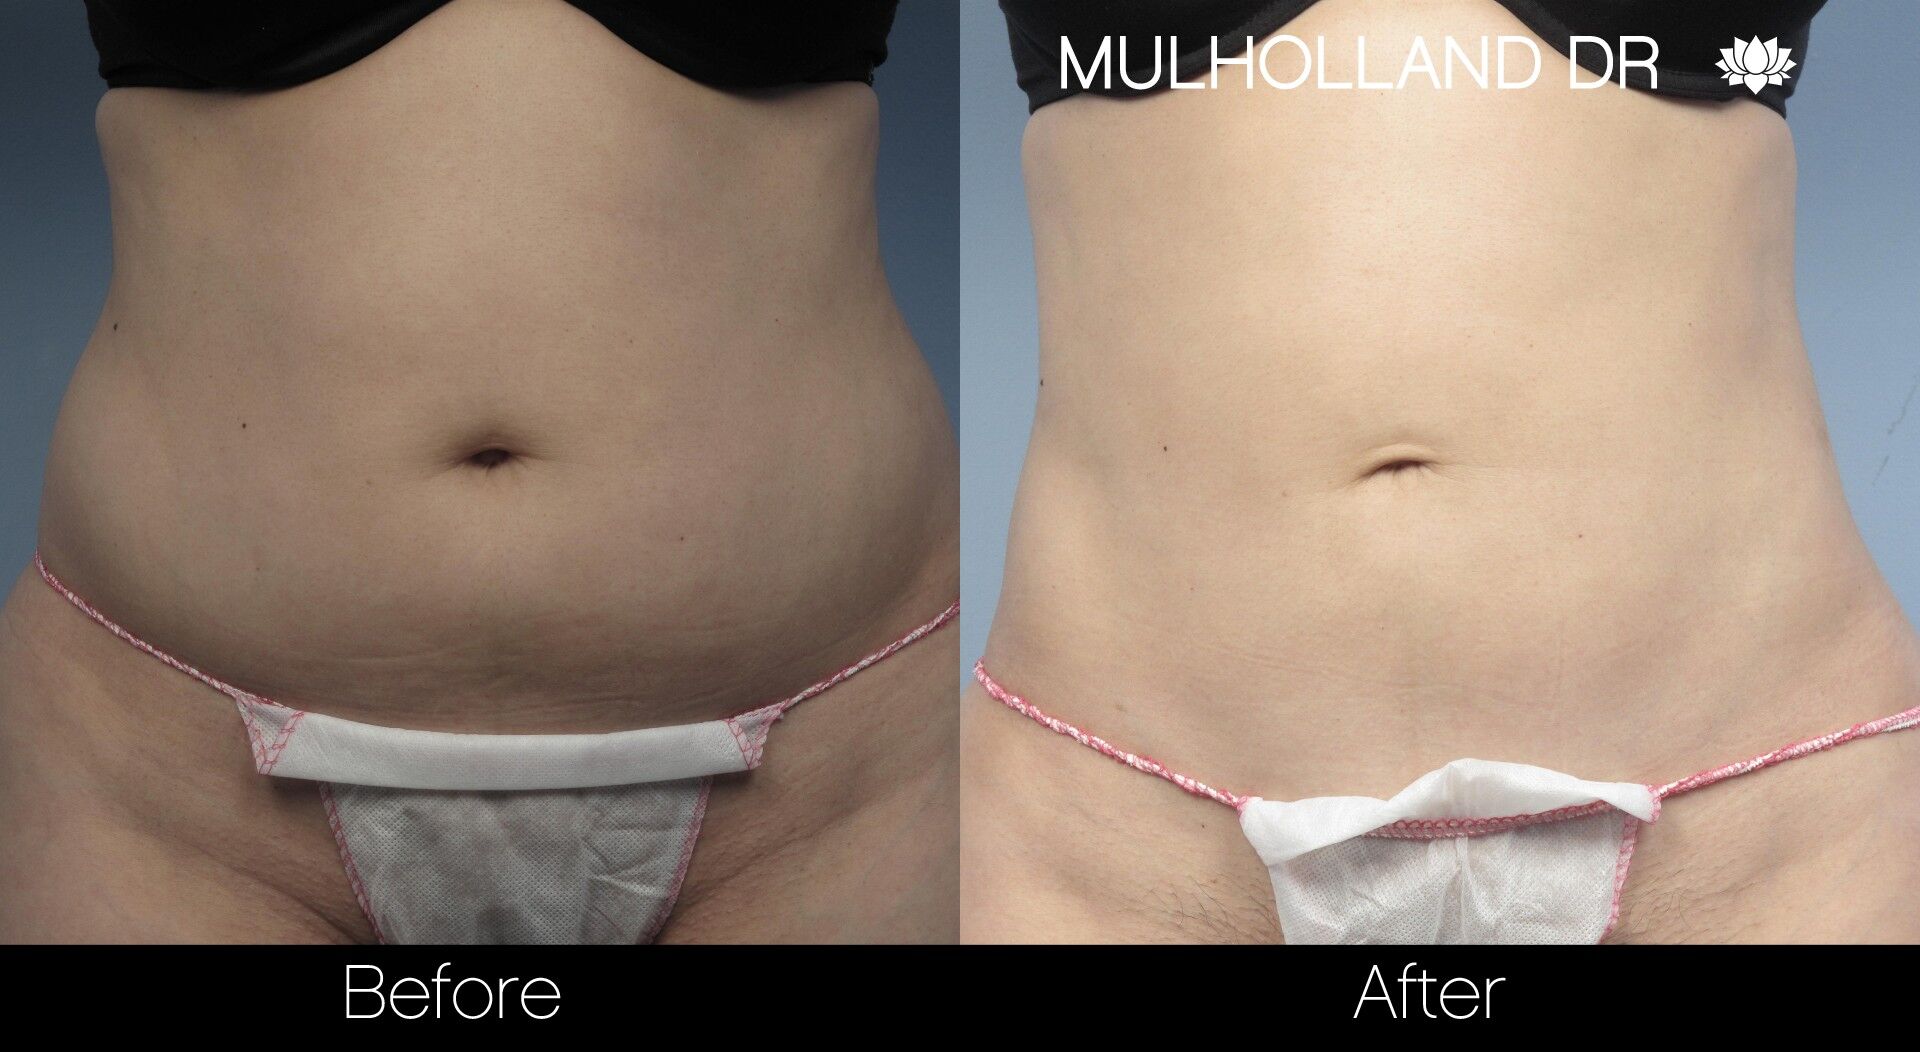 Liposuction in Nova Scotia: Sculpt Your Dream Body with Our Trusted Surgeons